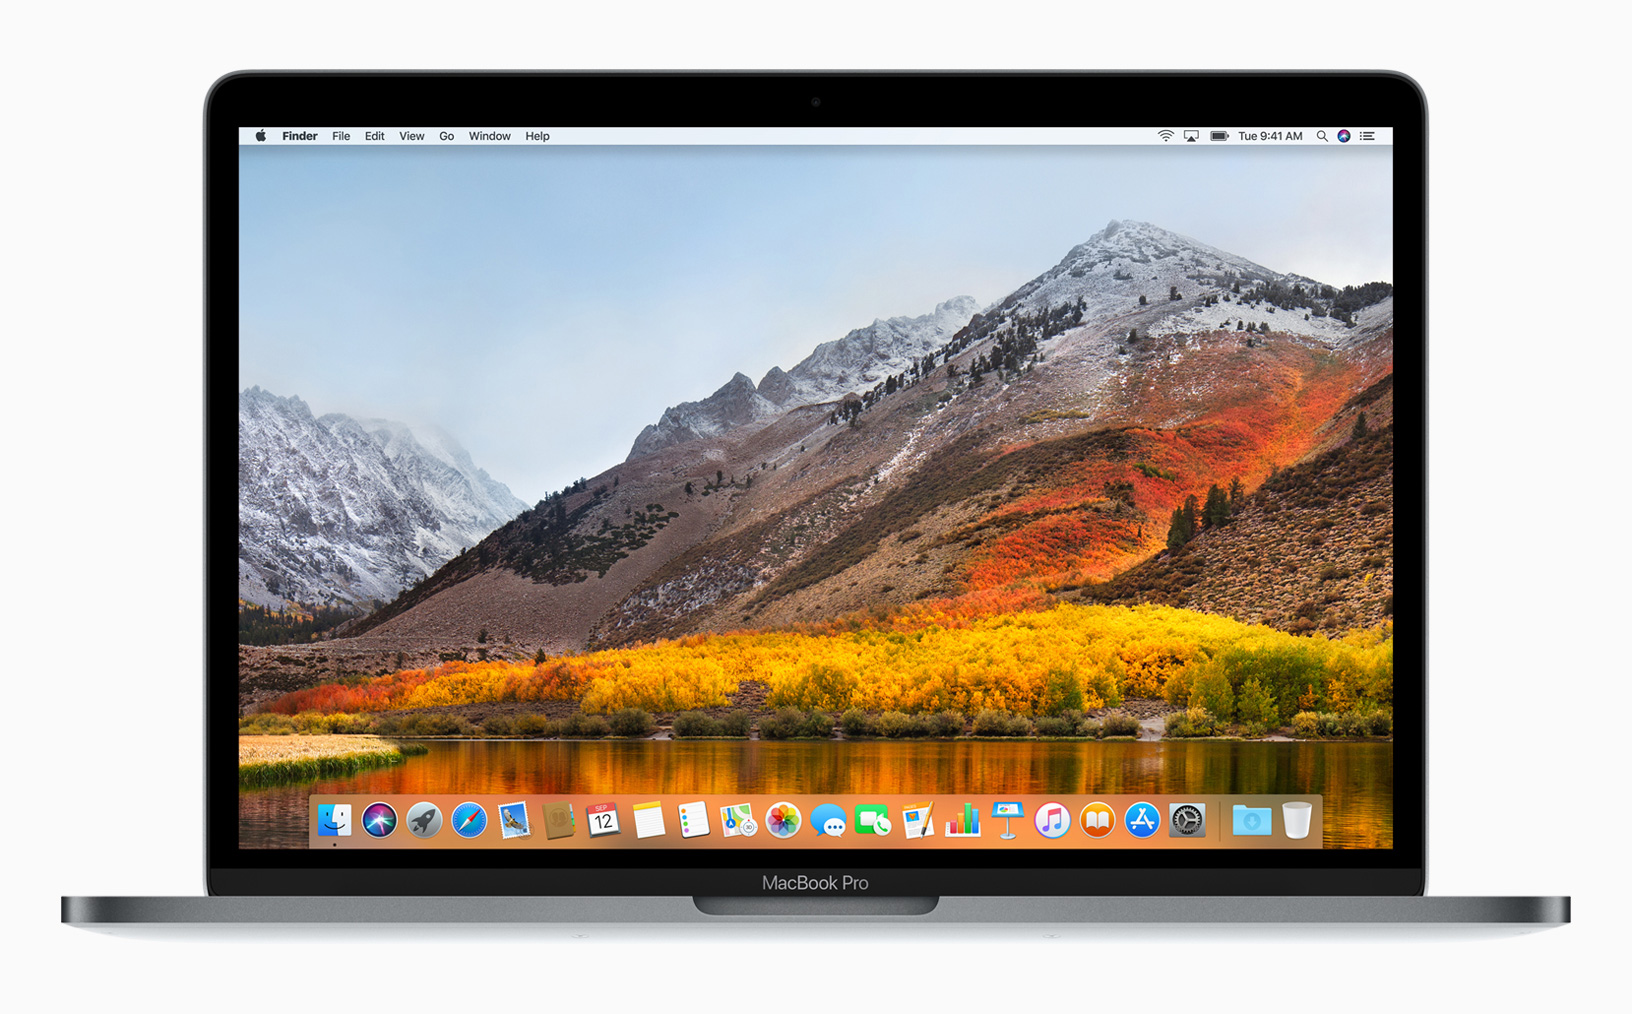 download the new for android High Sierra